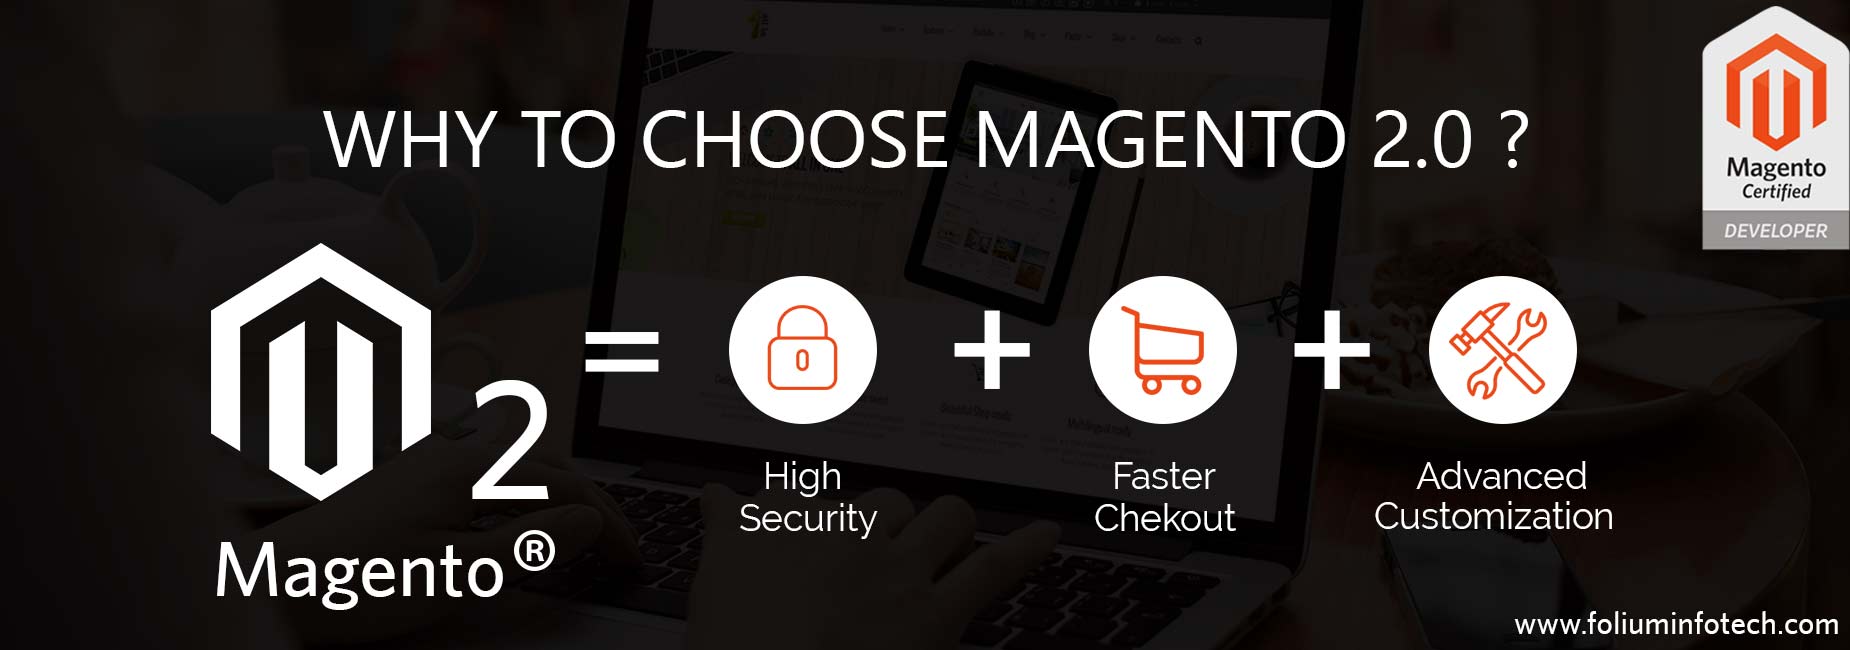 Why to choose Magento 2.0 for ecommerce development ?